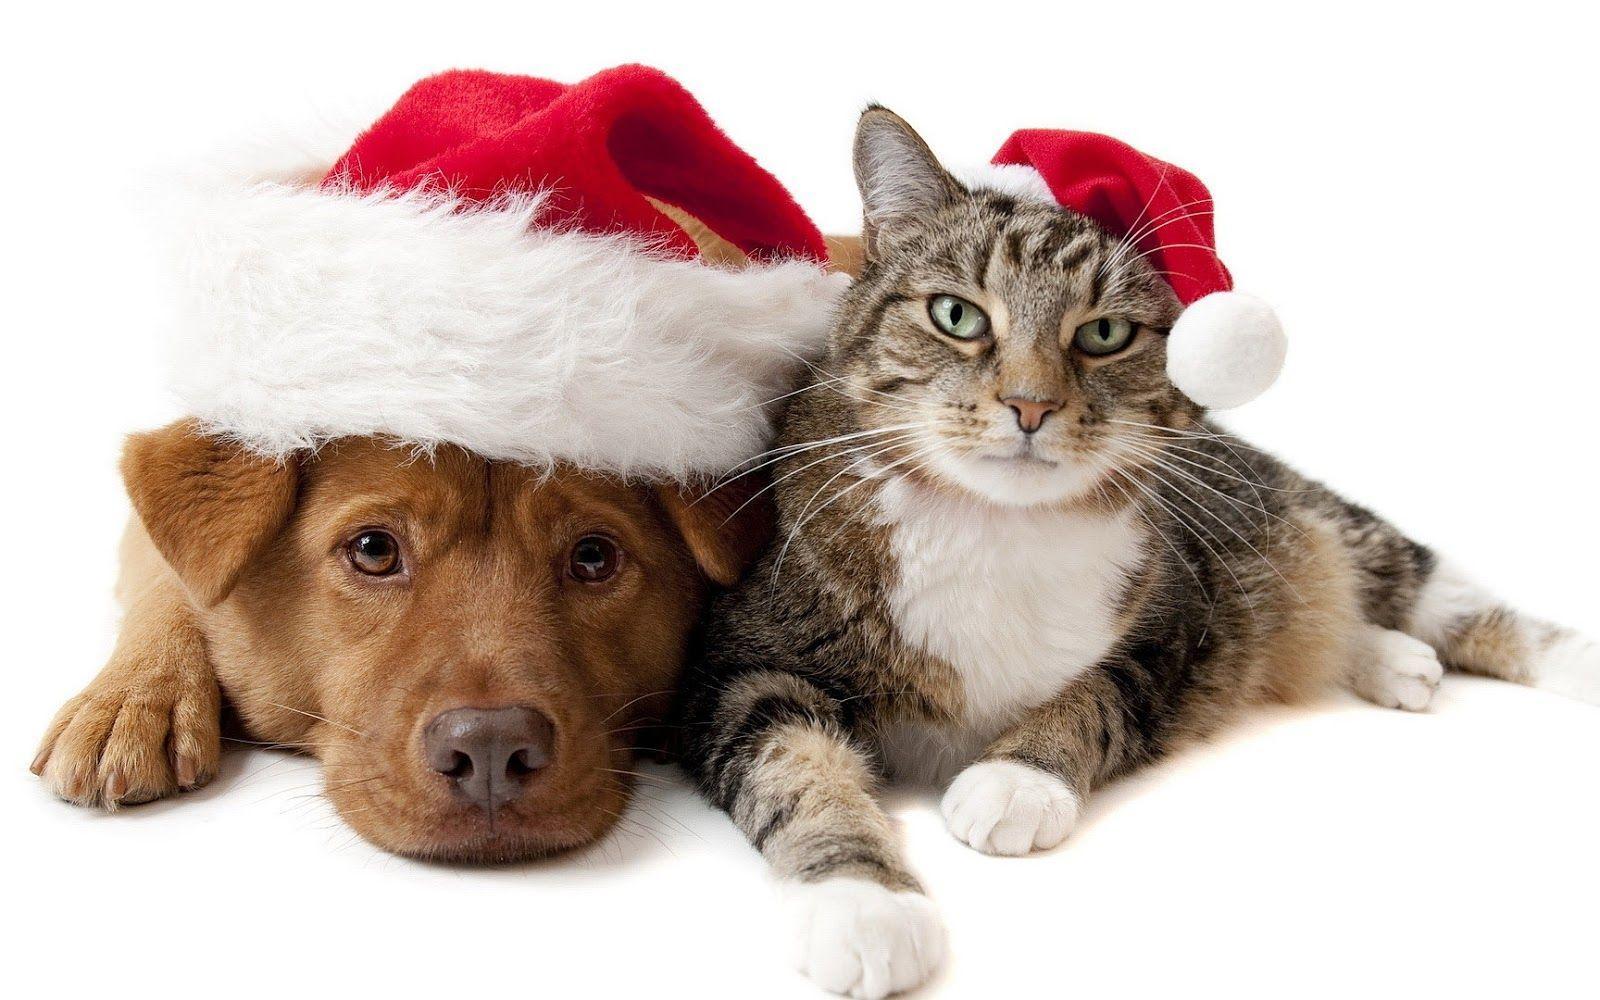 Christmas Wallpaper With A Cat And A Dog Wearing Christmas Hats Hd